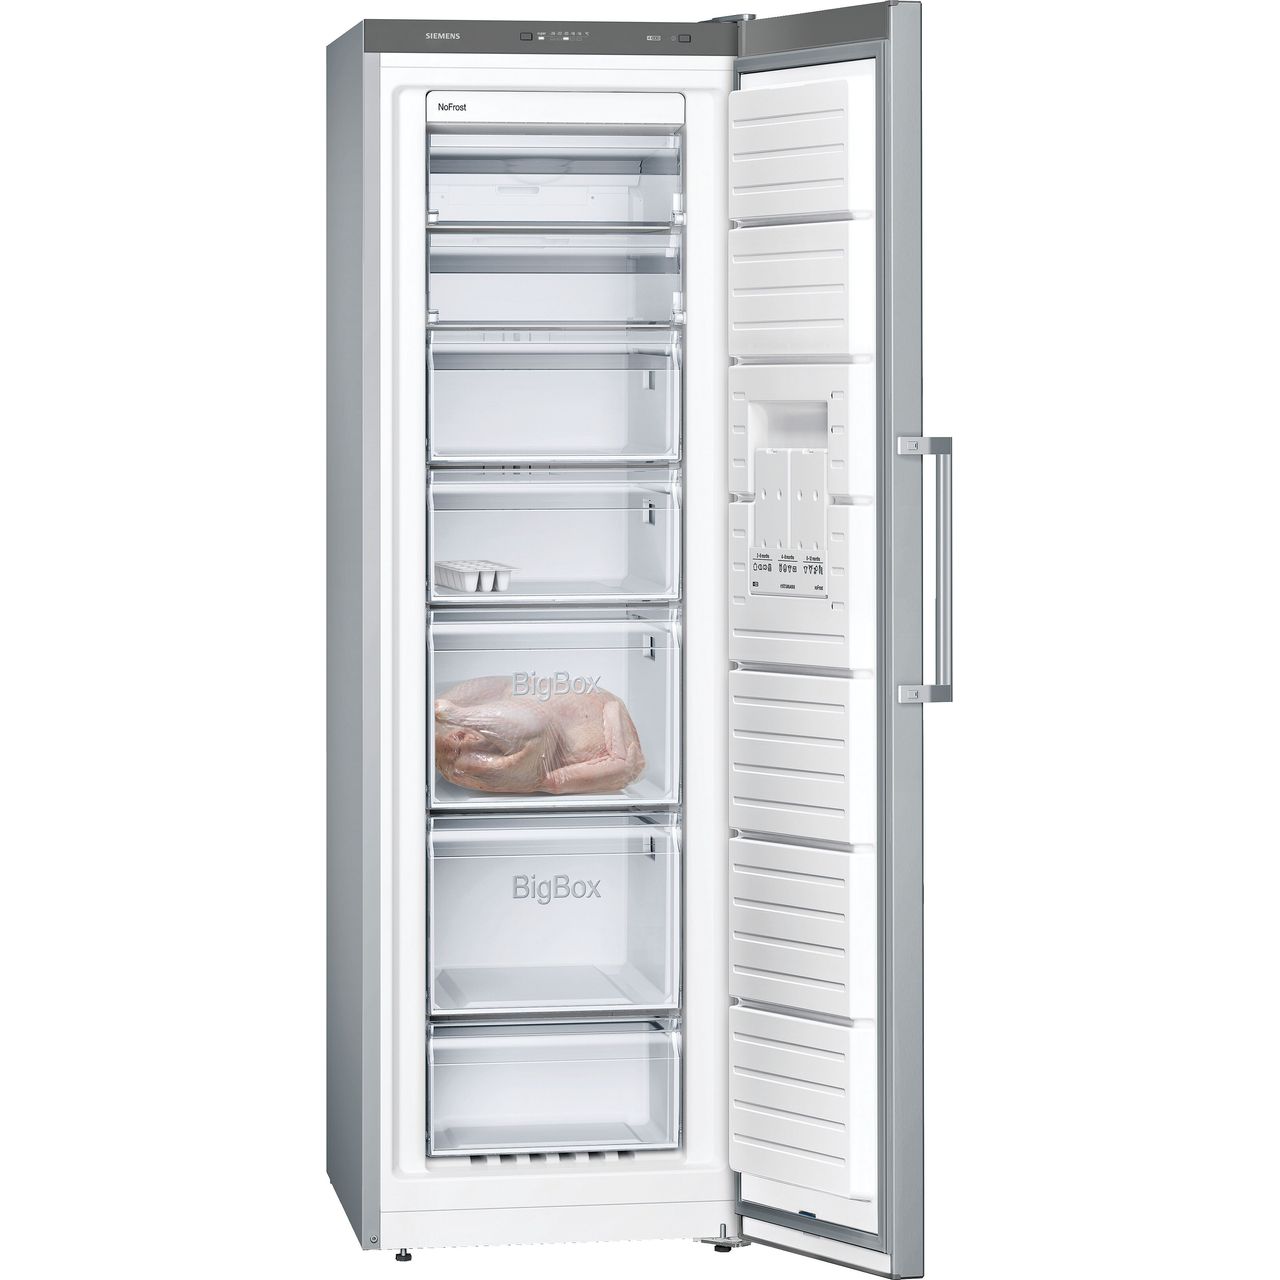 Siemens GS36NVIFV Frost Free Upright Freezer Review